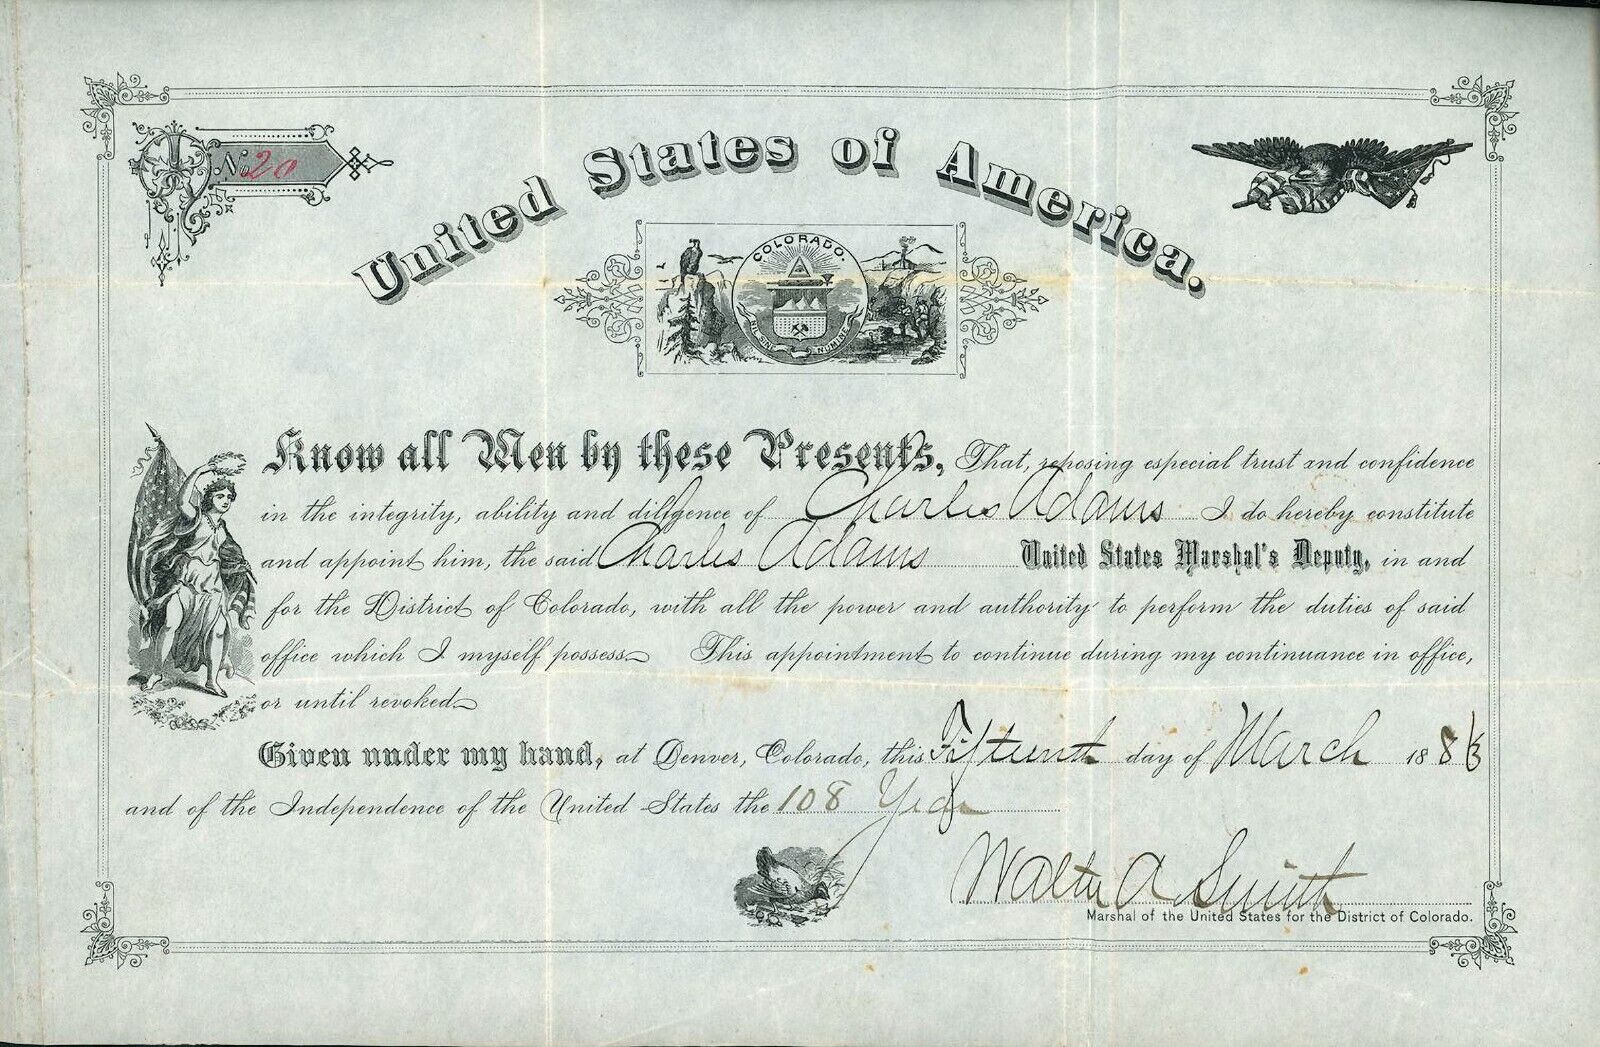 UNITED STATES DEPUTY MARSHAL CHARLES ADAMS Colorado appointment certificate 1883